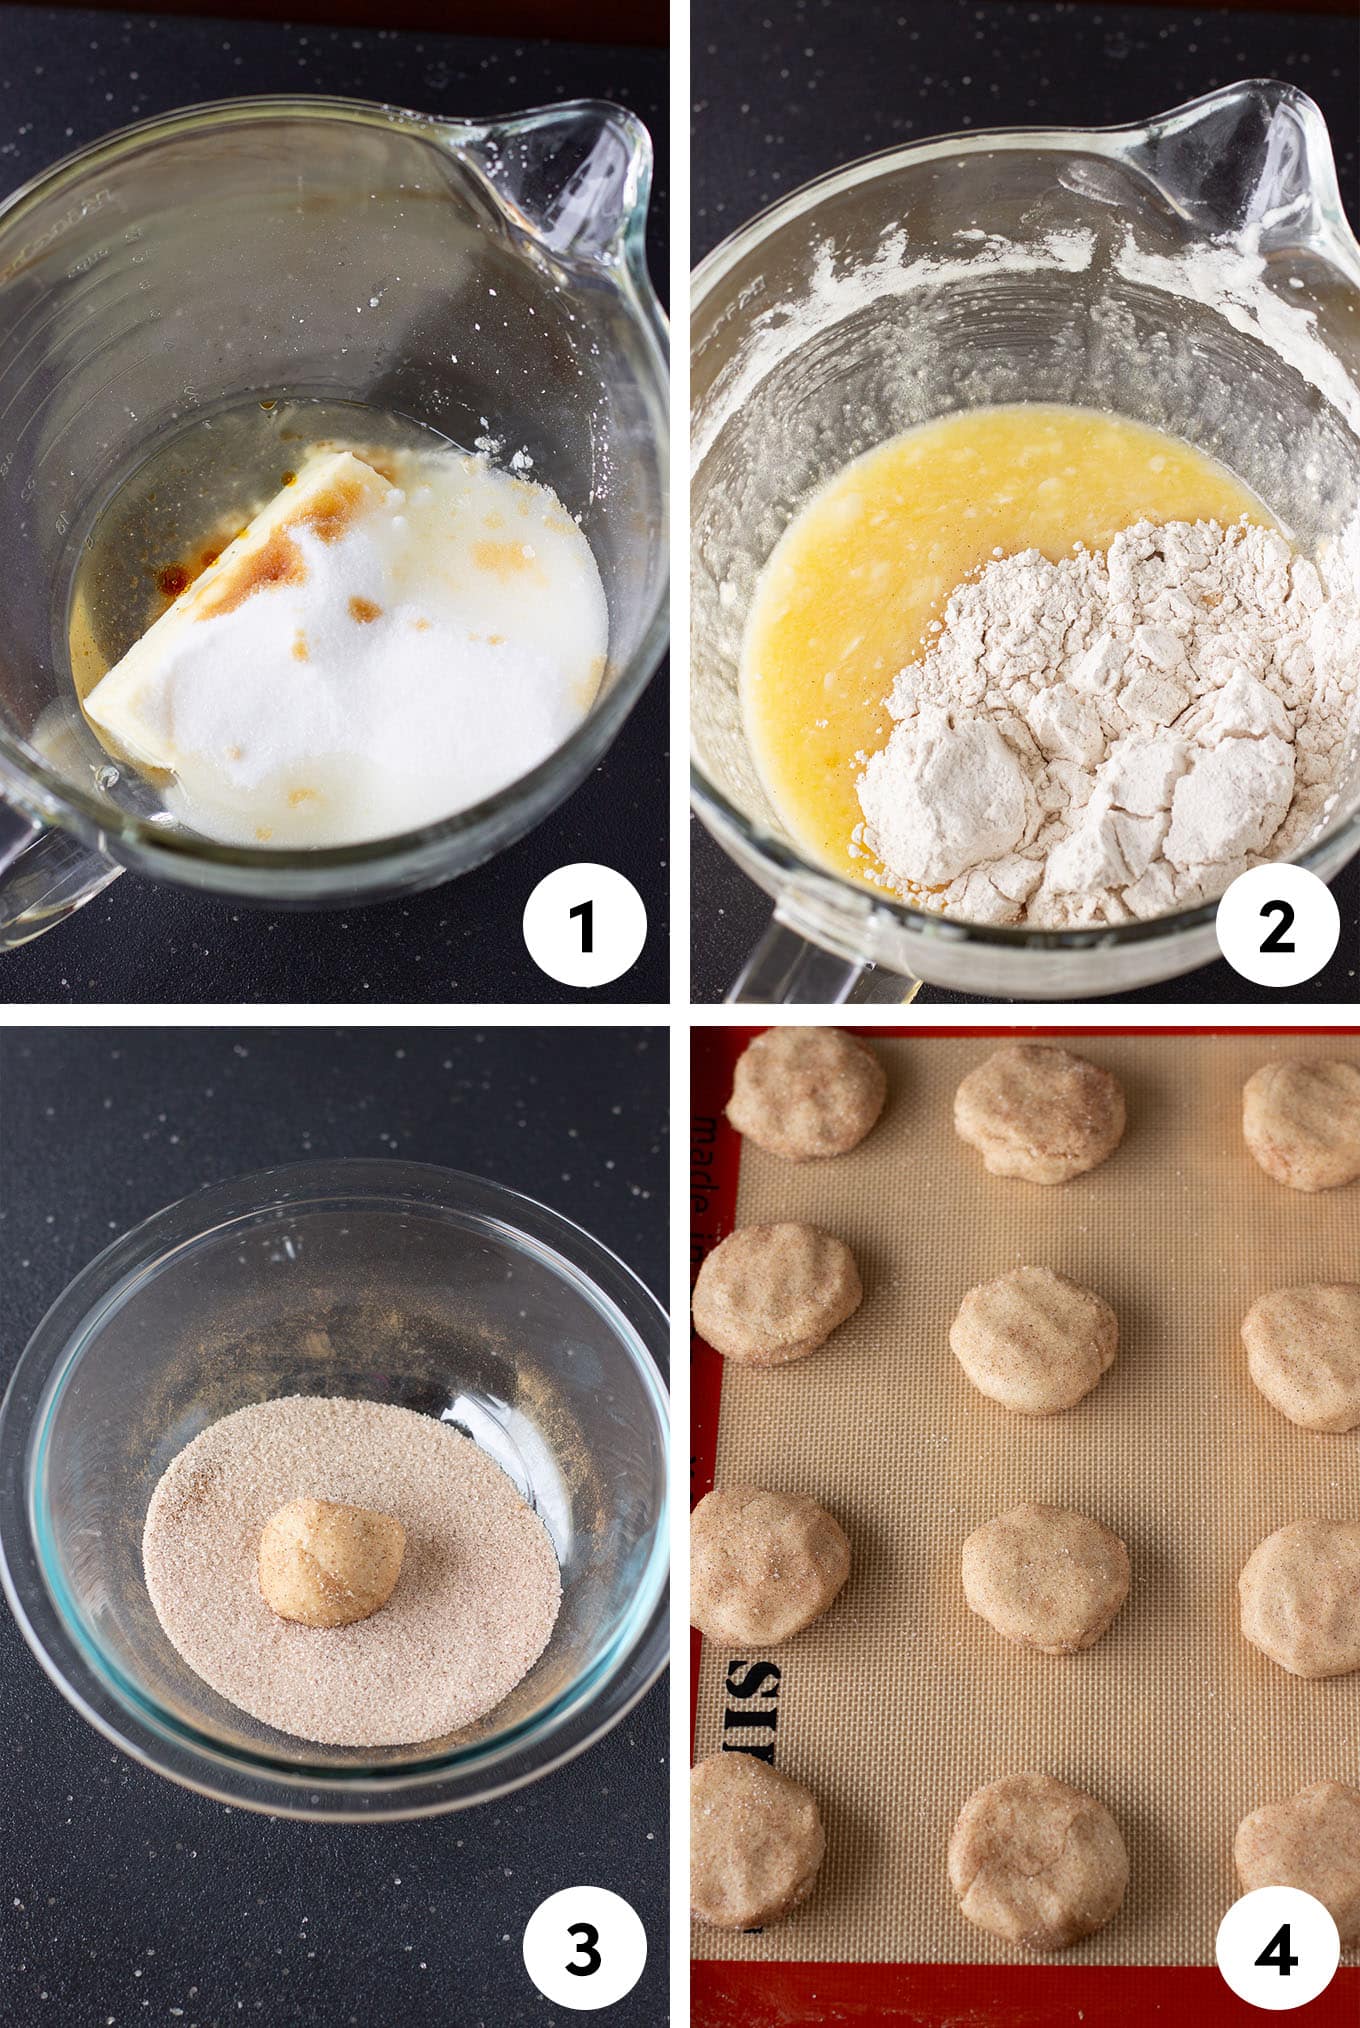 A collage of images showing the steps for mixing up snickerdoodle cookies.